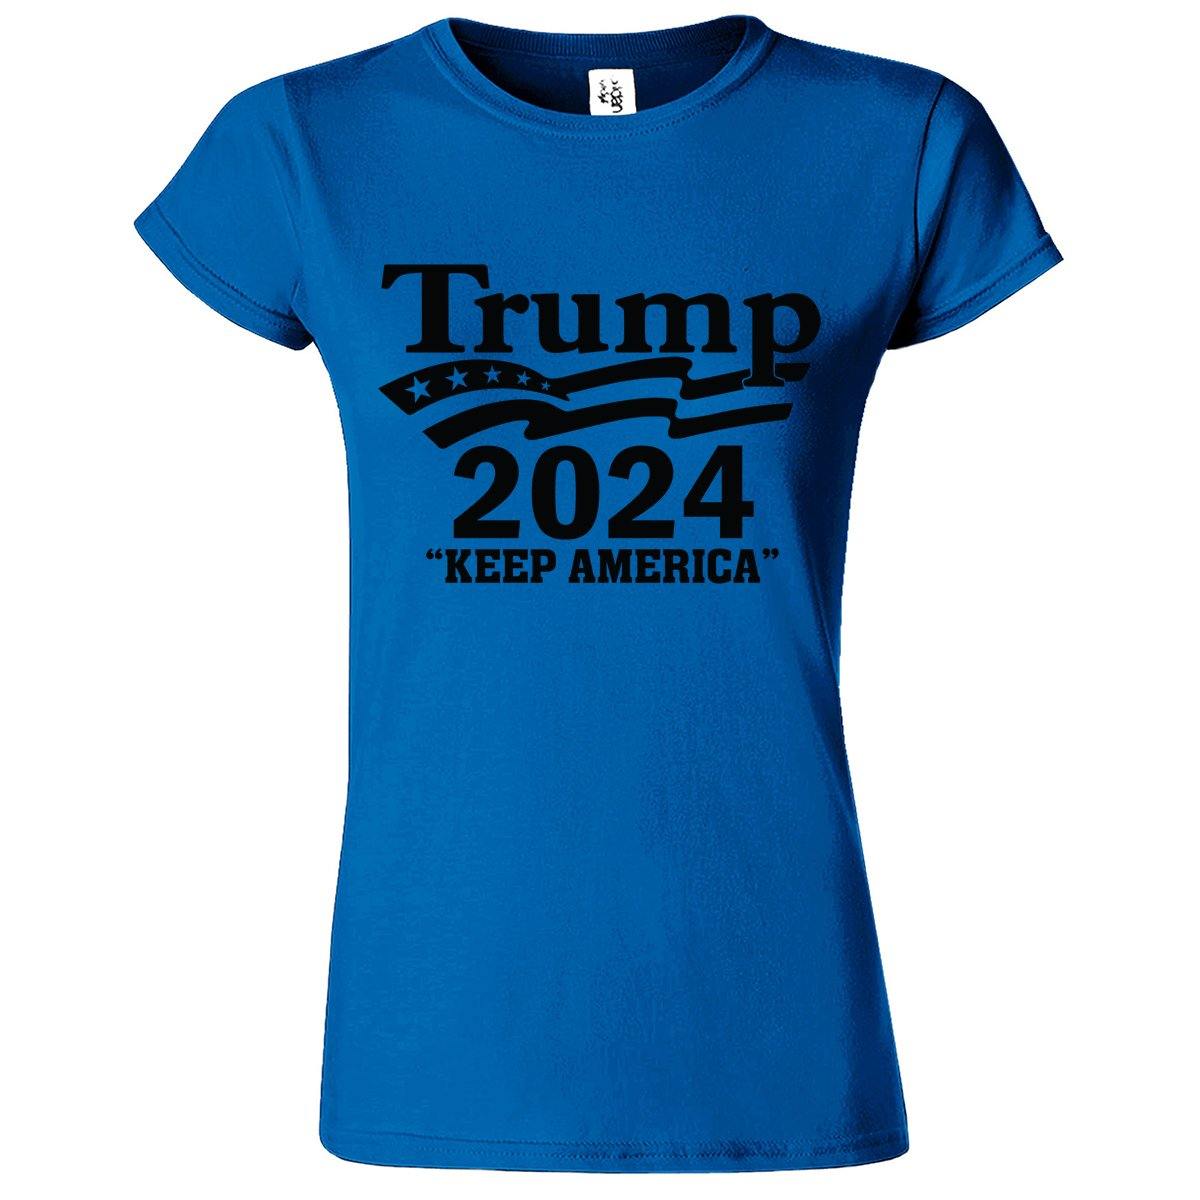 Trump 2024 Keep America Printed T-Shirt for Women's - ApparelinClick